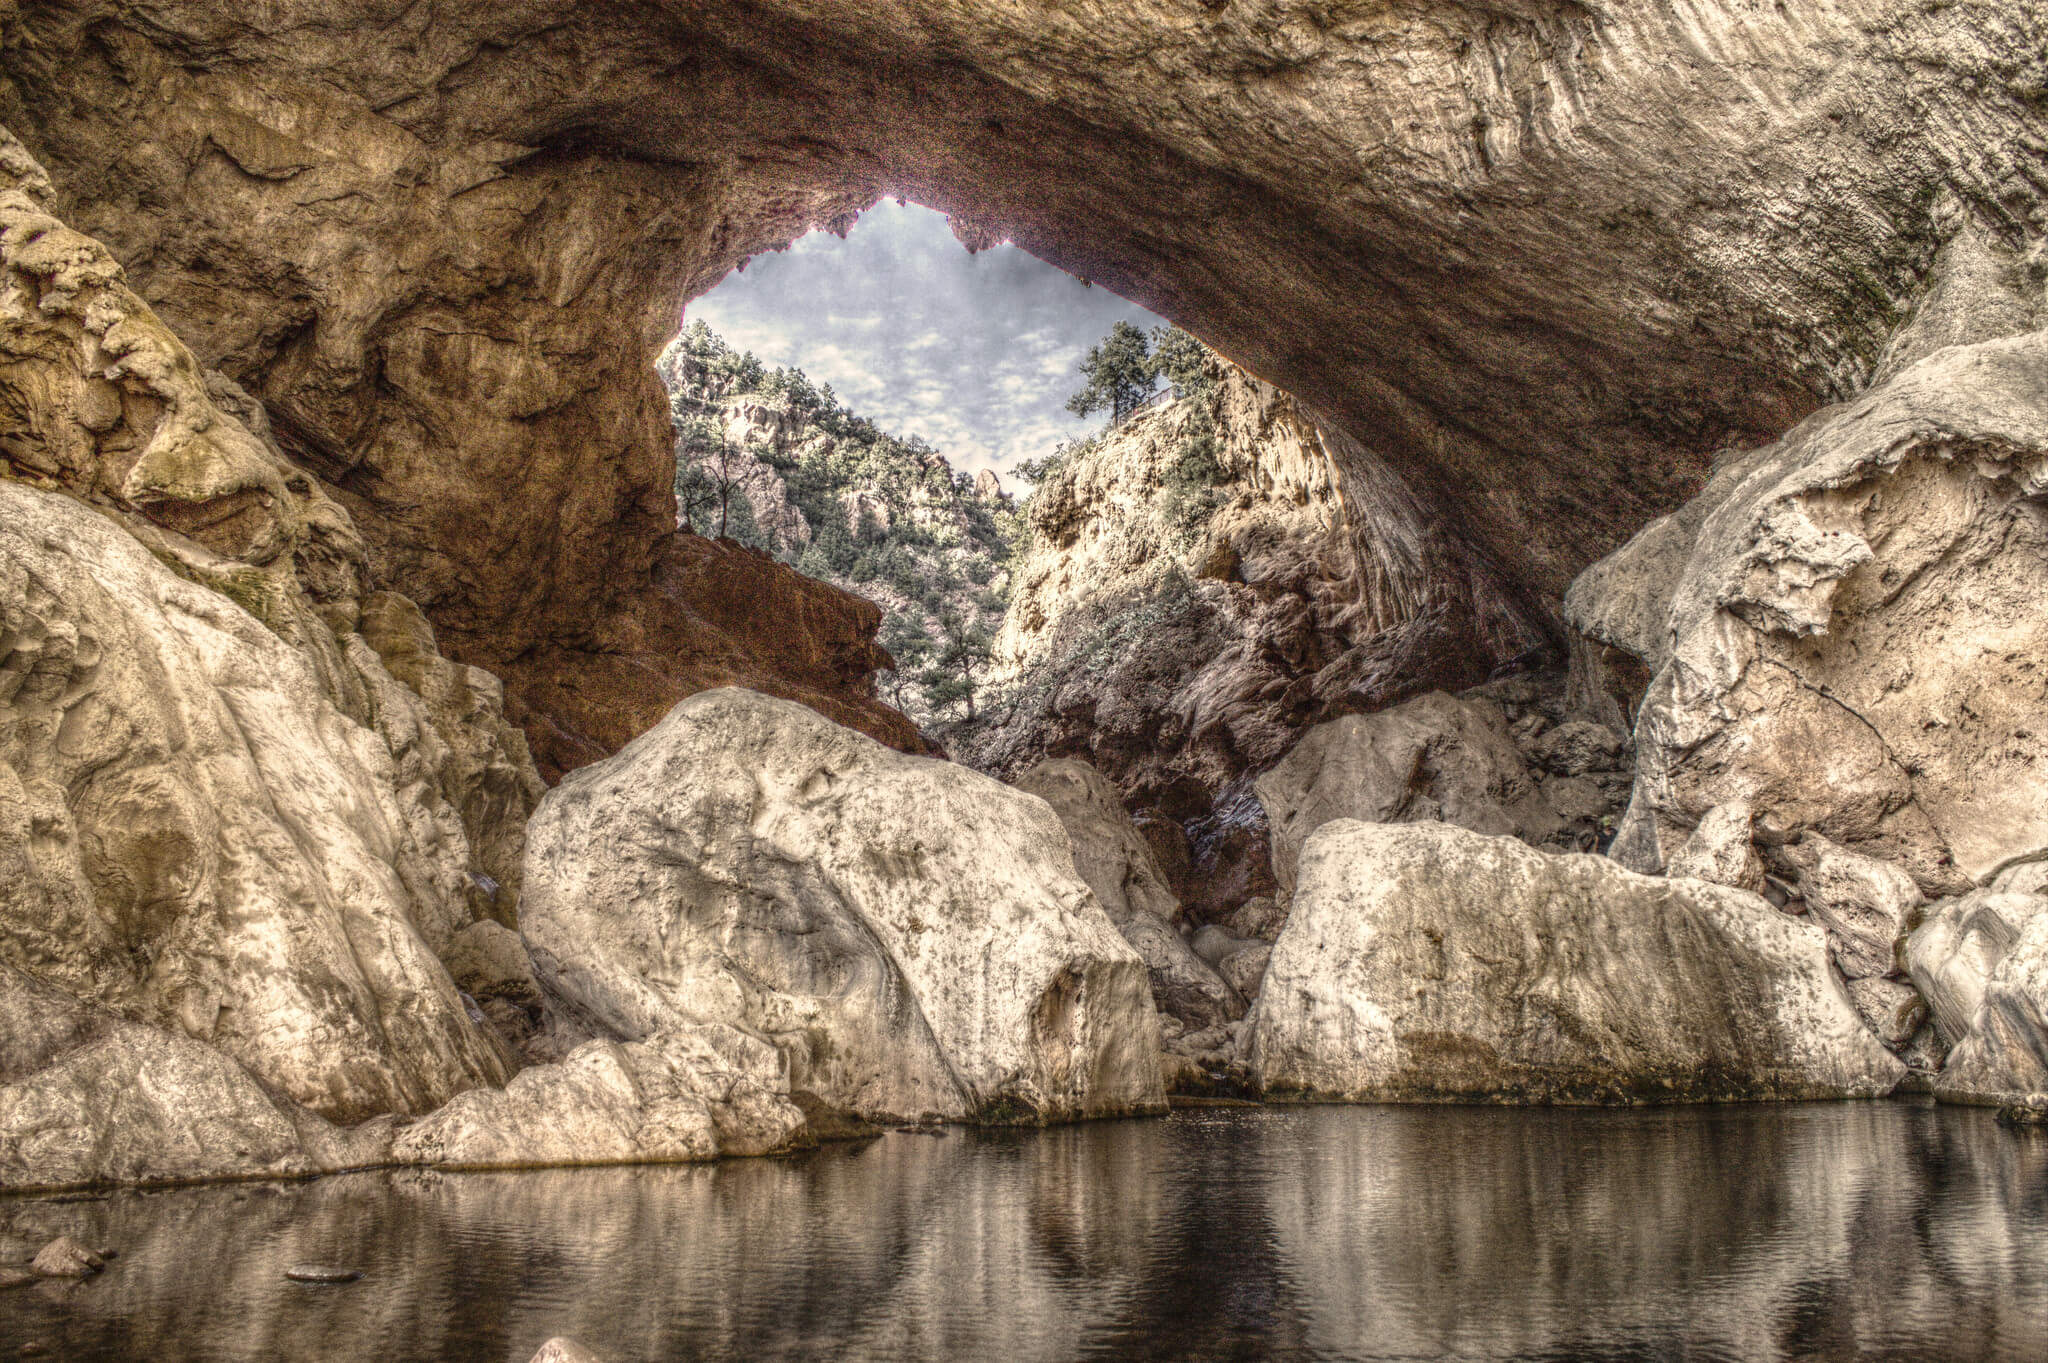 Looking up through the Natural Bridge.
Flickr User Anthony Restar